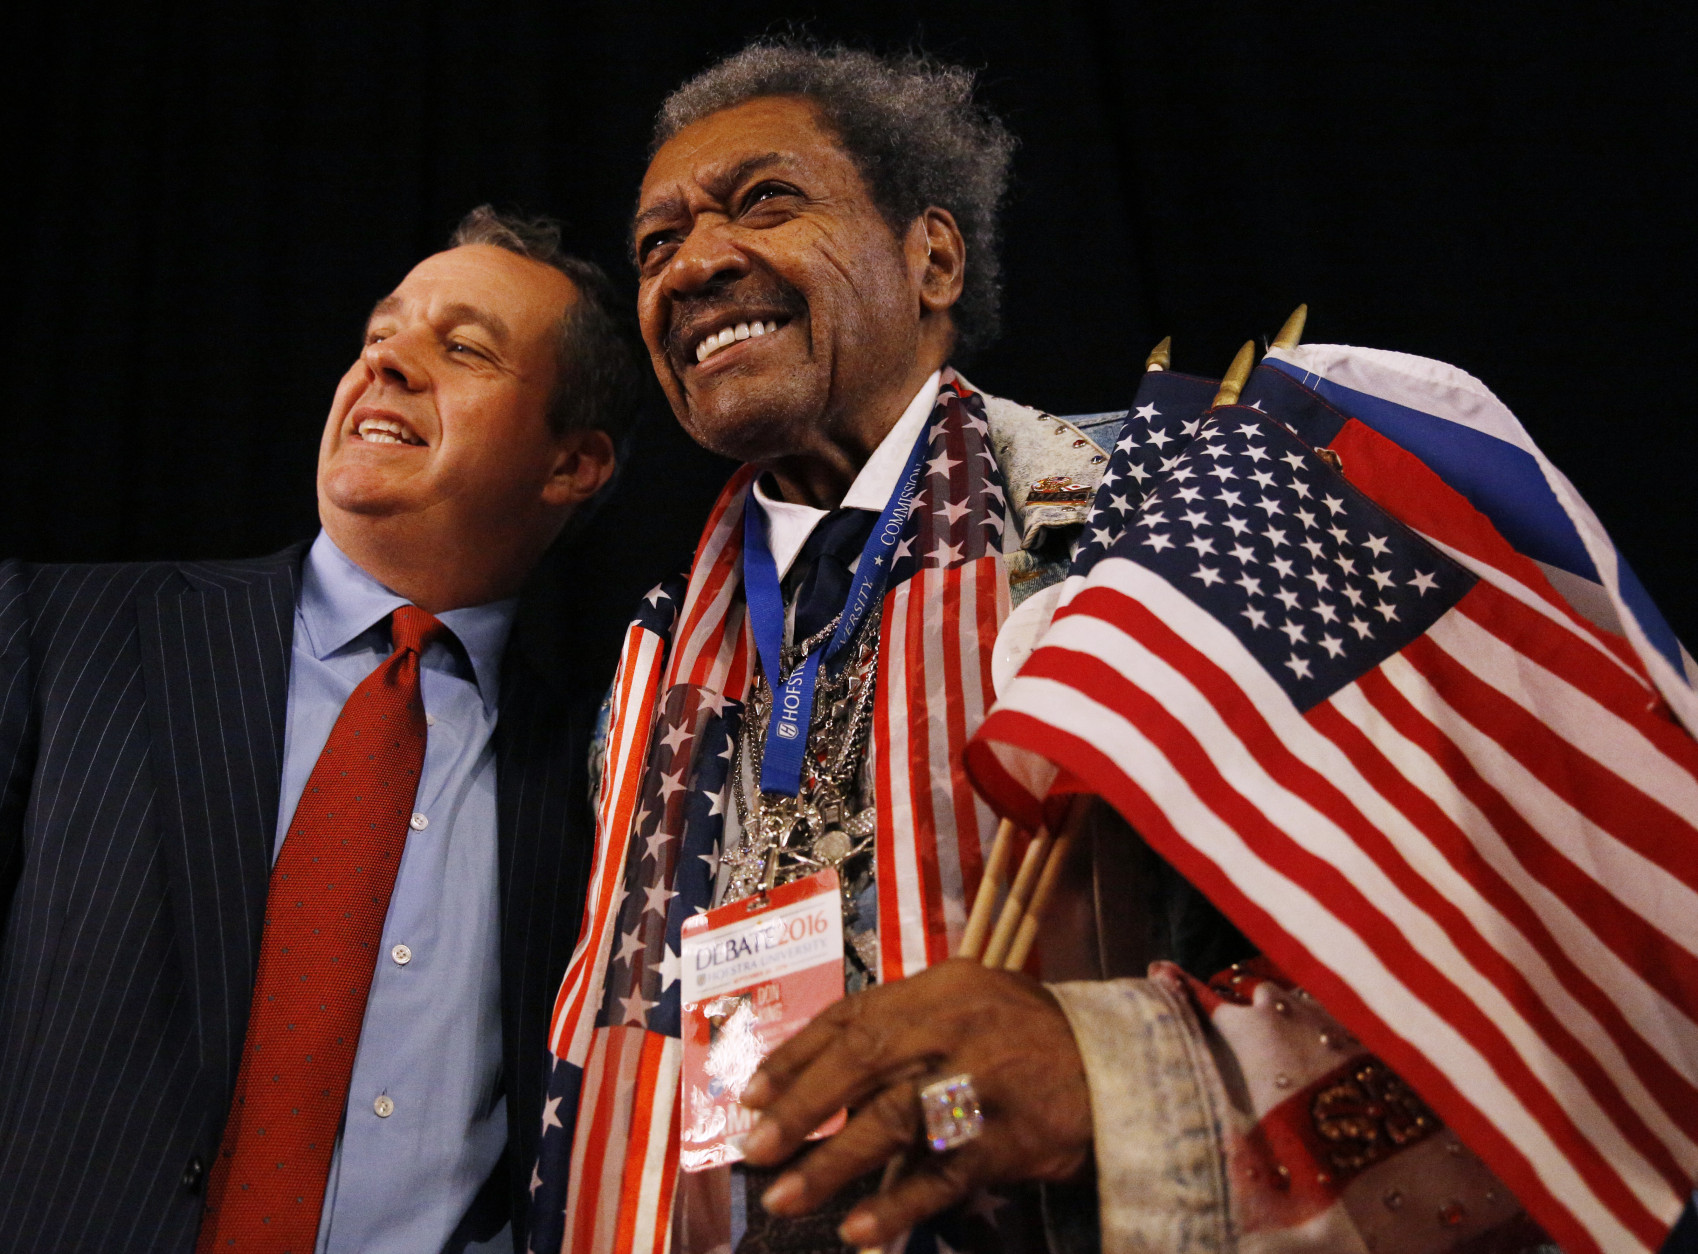 Boxing promoter Don King, right, poses with a guest before the presidential debate between Democratic presidential nominee Hillary Clinton and Republican presidential nominee Donald Trump at Hofstra University in Hempstead, N.Y., Monday, Sept. 26, 2016. (AP Photo/Patrick Semansky)